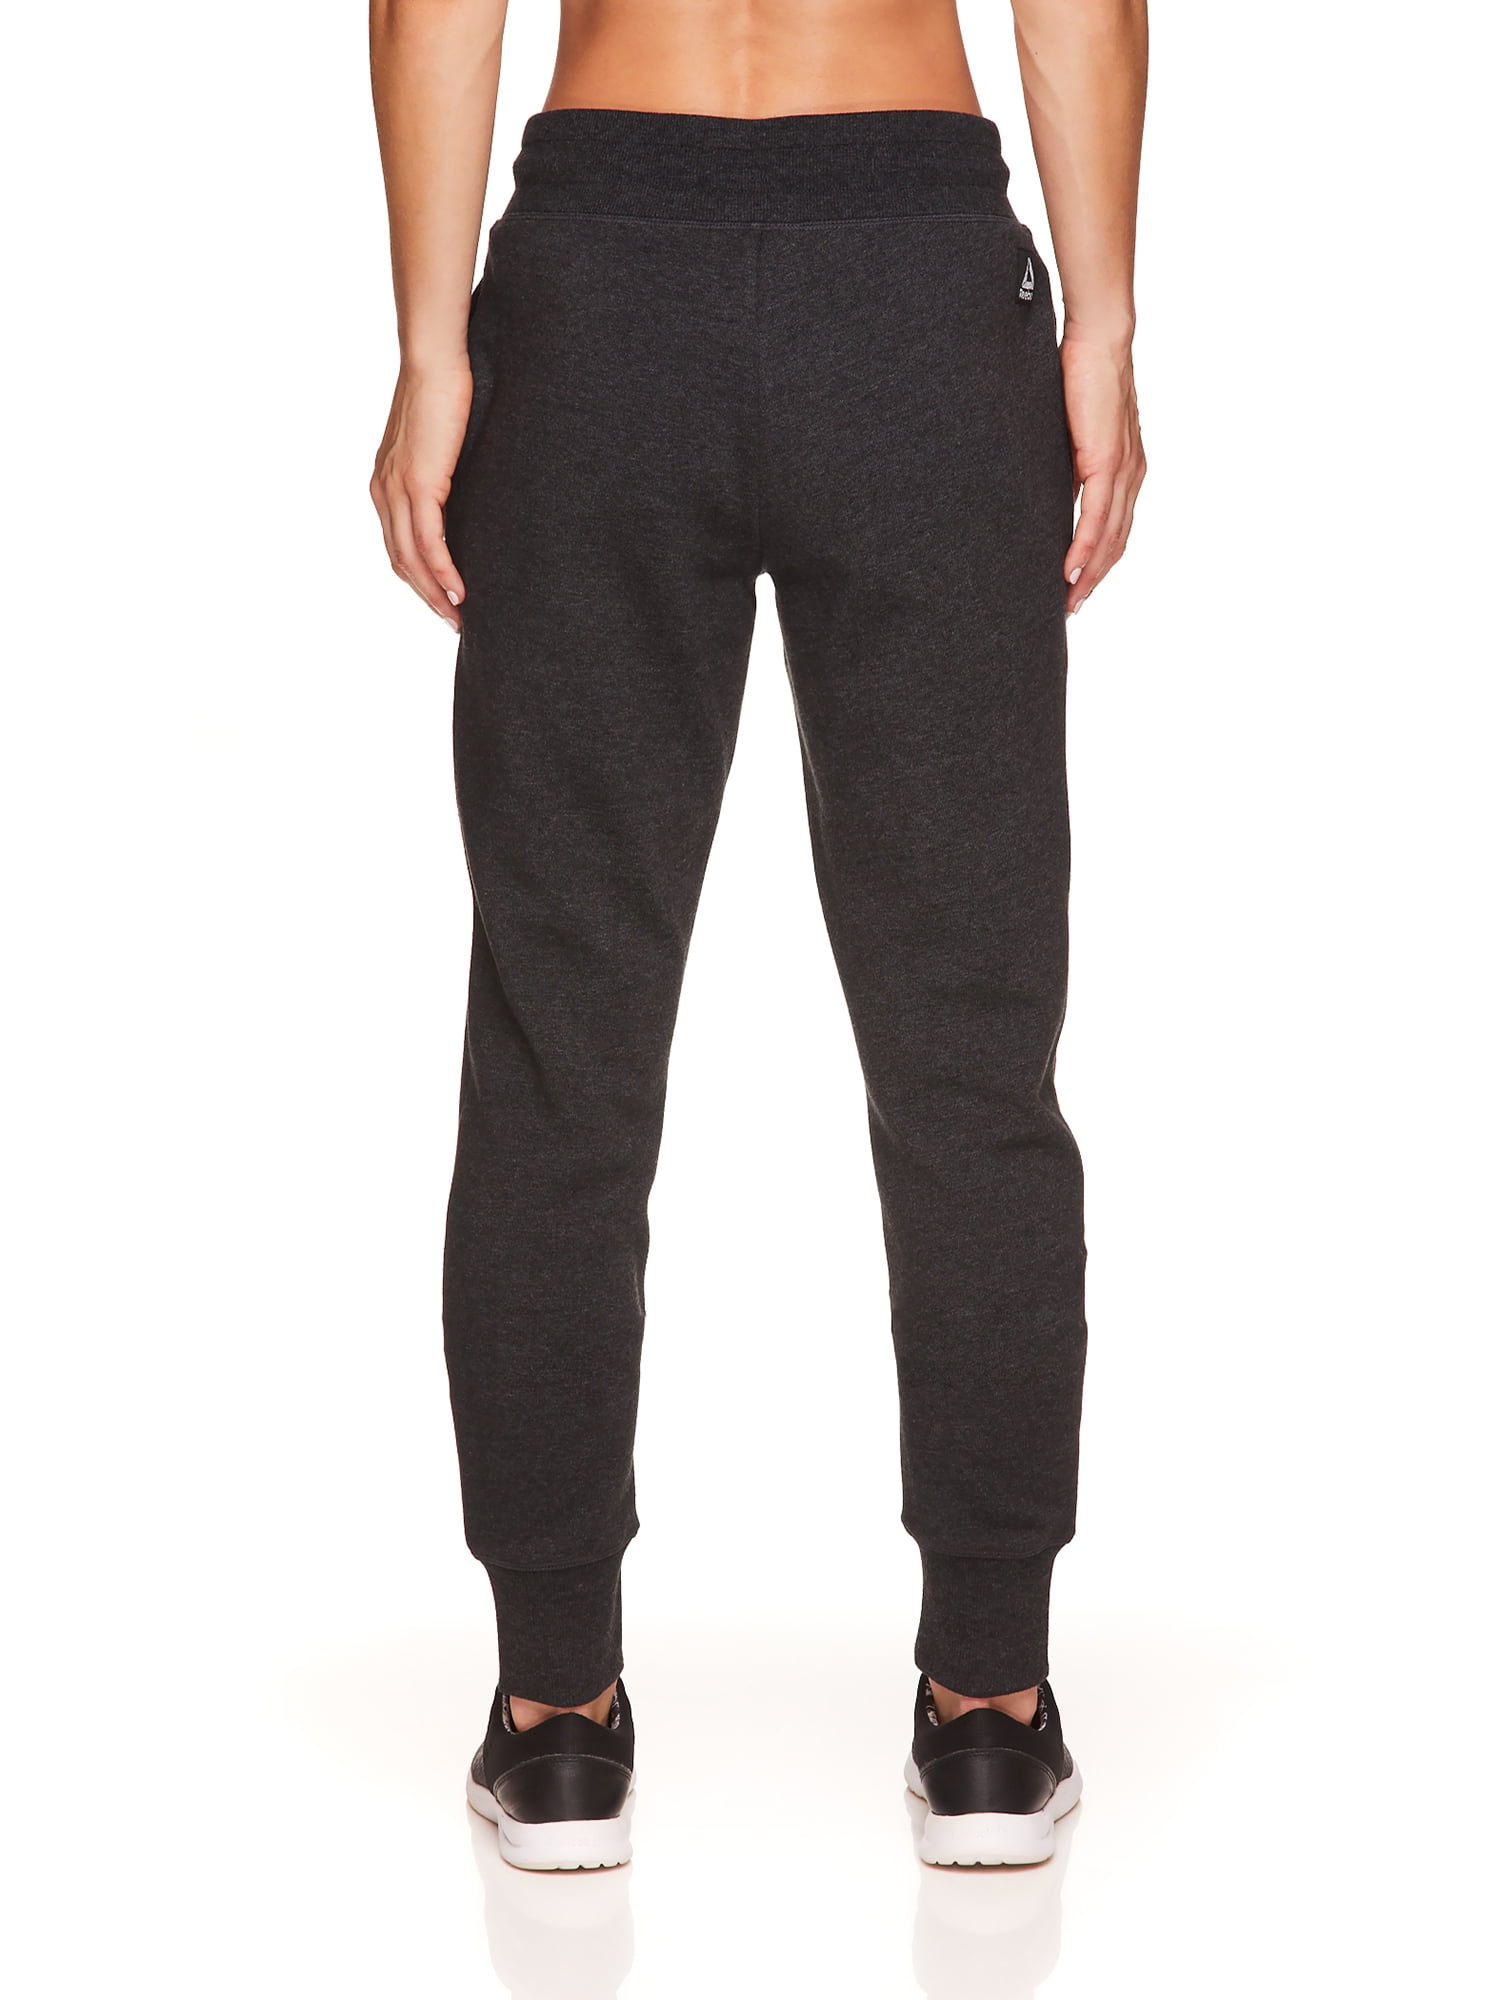 Shop Reebok Women's Elasticated Trousers up to 85% Off | DealDoodle